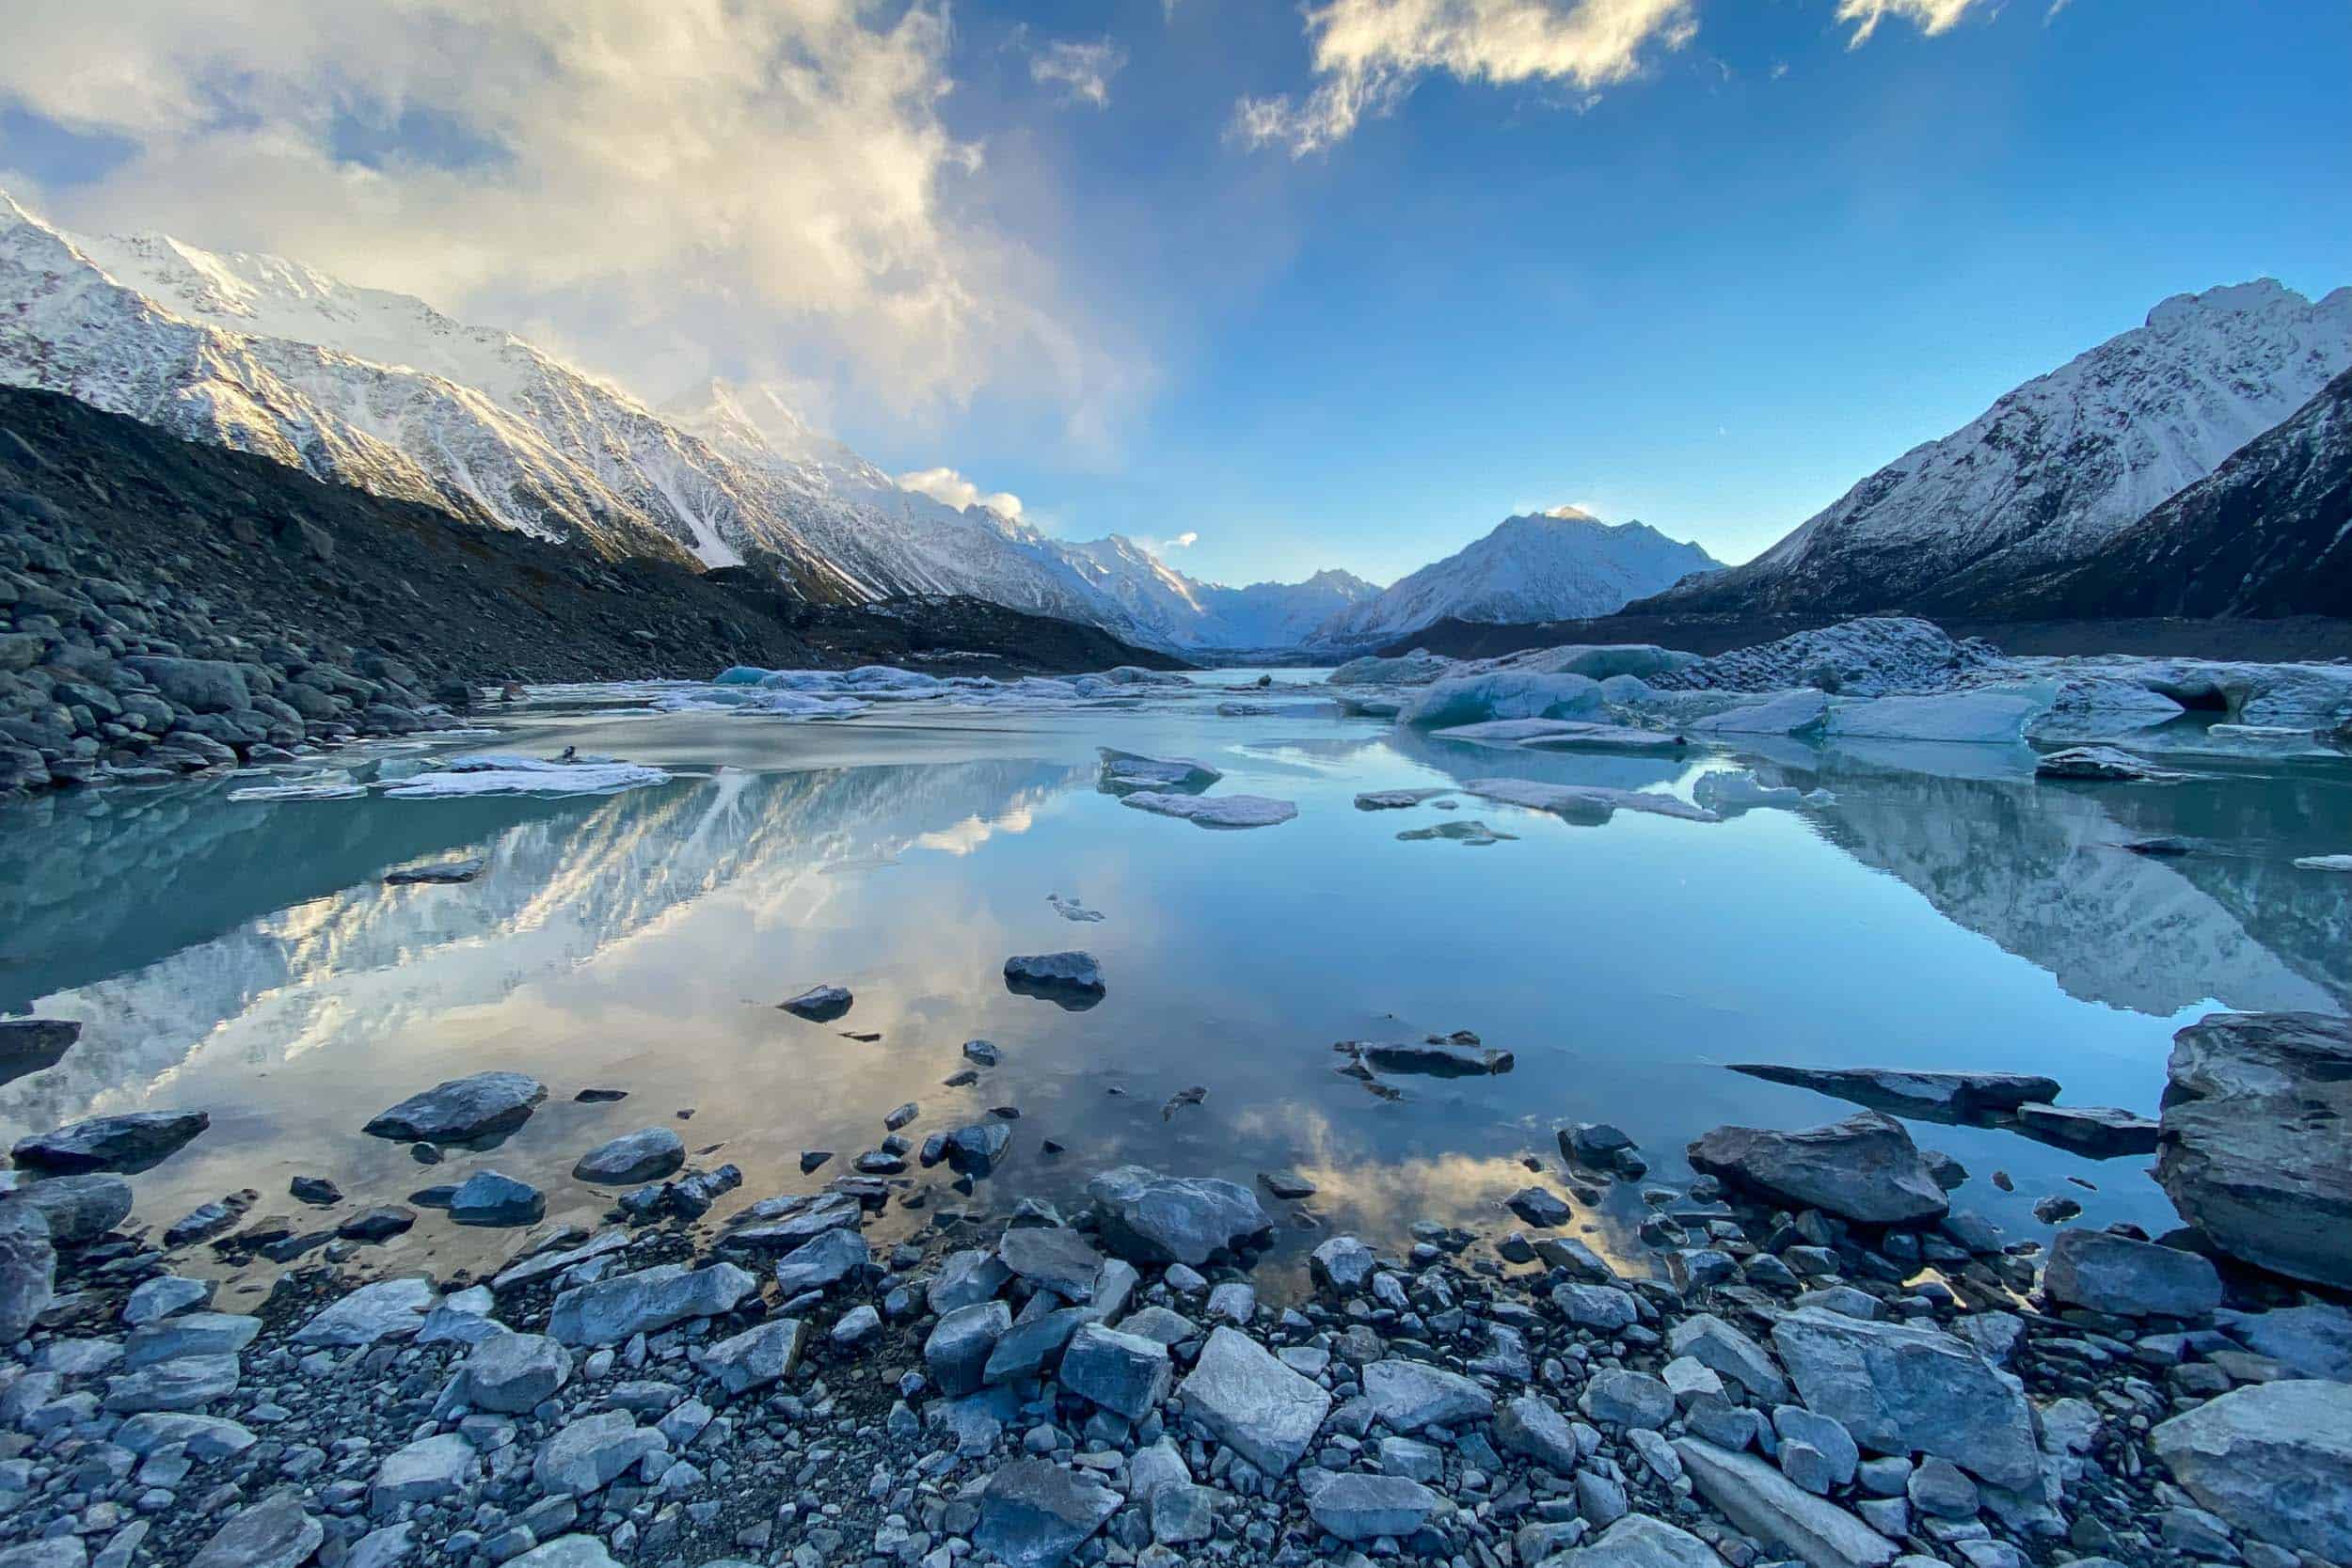 Mt Cook and Tasman Glacier in winter are two of the most beautiful places in New Zealand